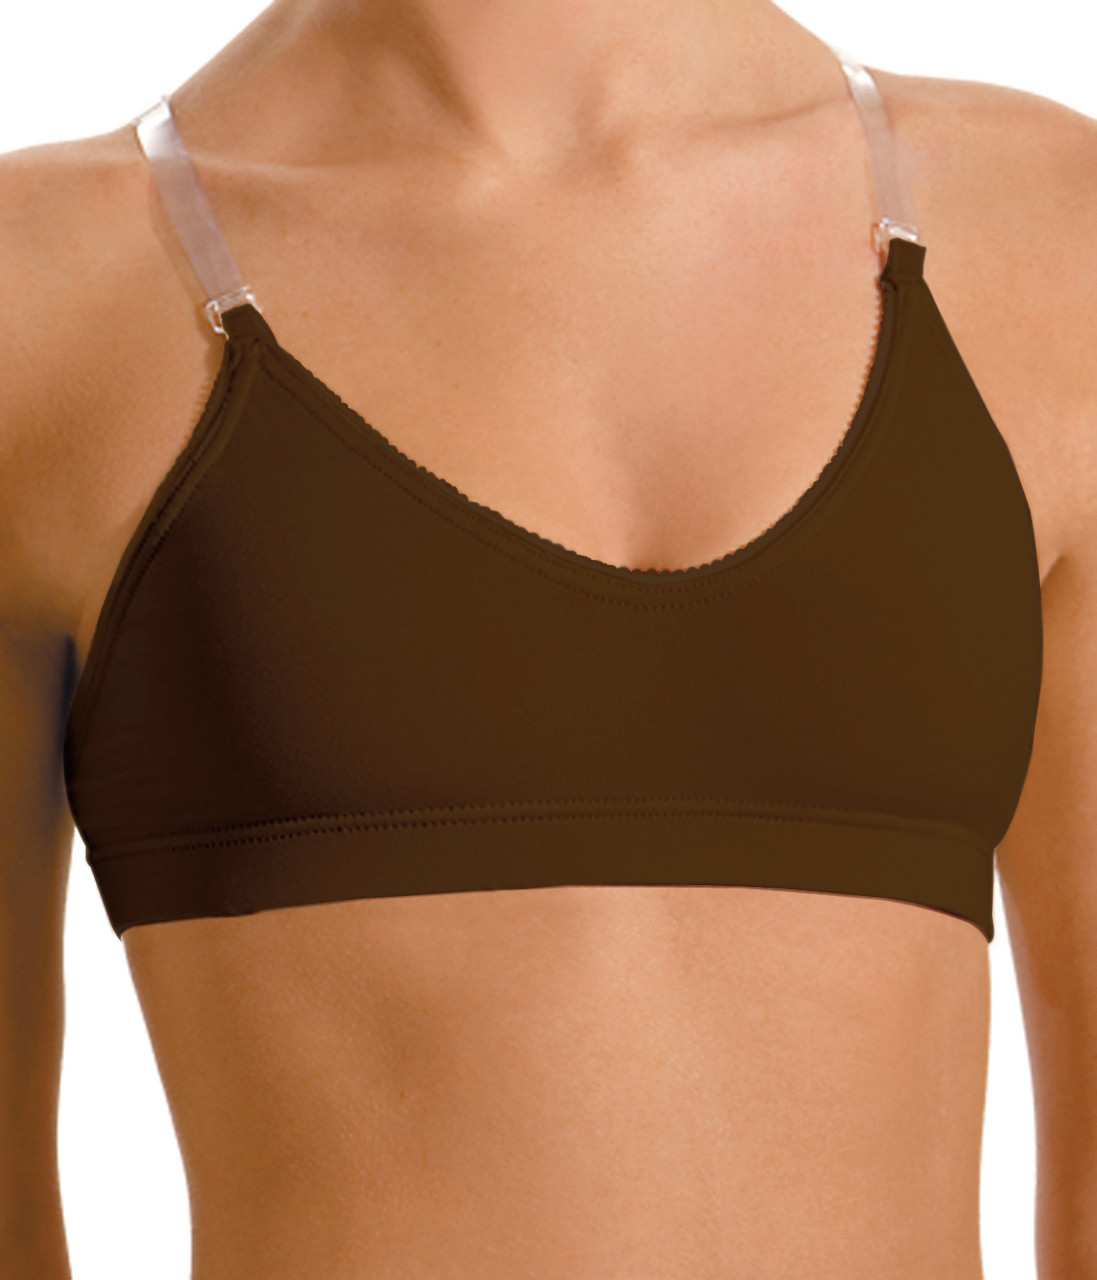 Body Wrappers Adjustable Camisole Pull On Bra 261 : Dance Max